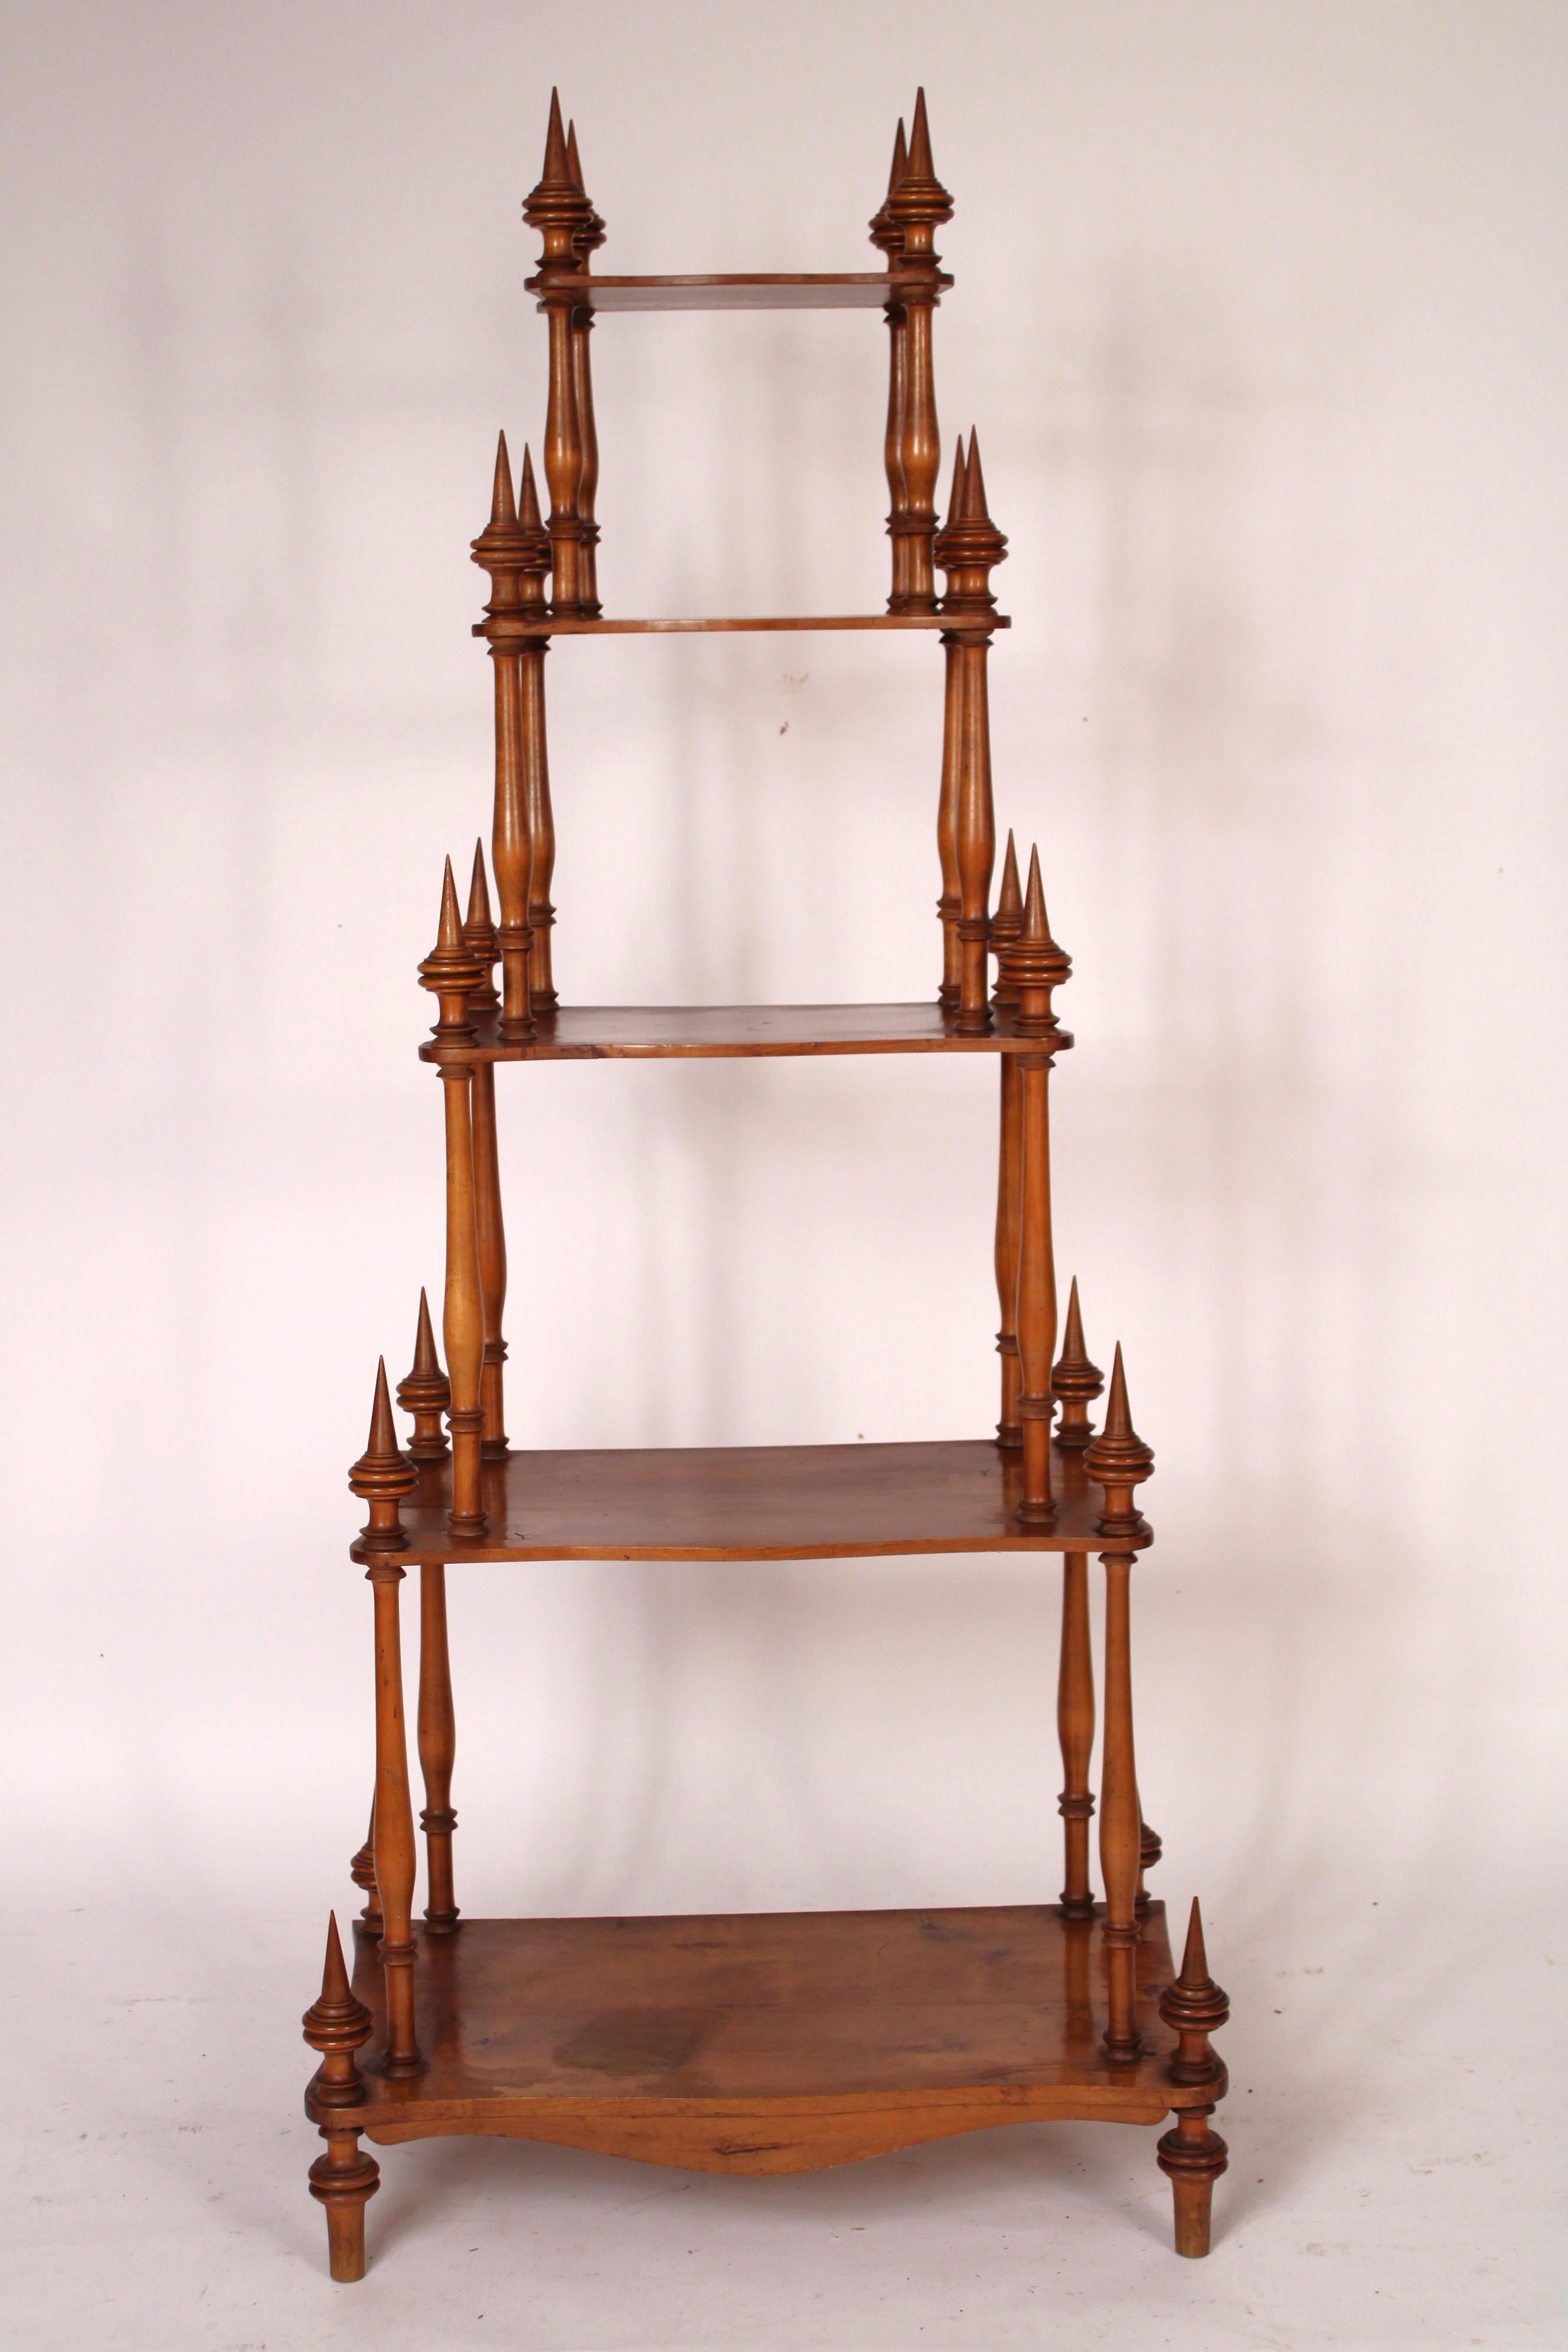 Biedermeier style 5 tier fruit wood etagere, late 19th century. With 5 shelves all 5 shelves are graduated in size with serpentine shaped front edges, each shelf has 4 spire shaped finials. Excellent for displaying a collection of art objects or for